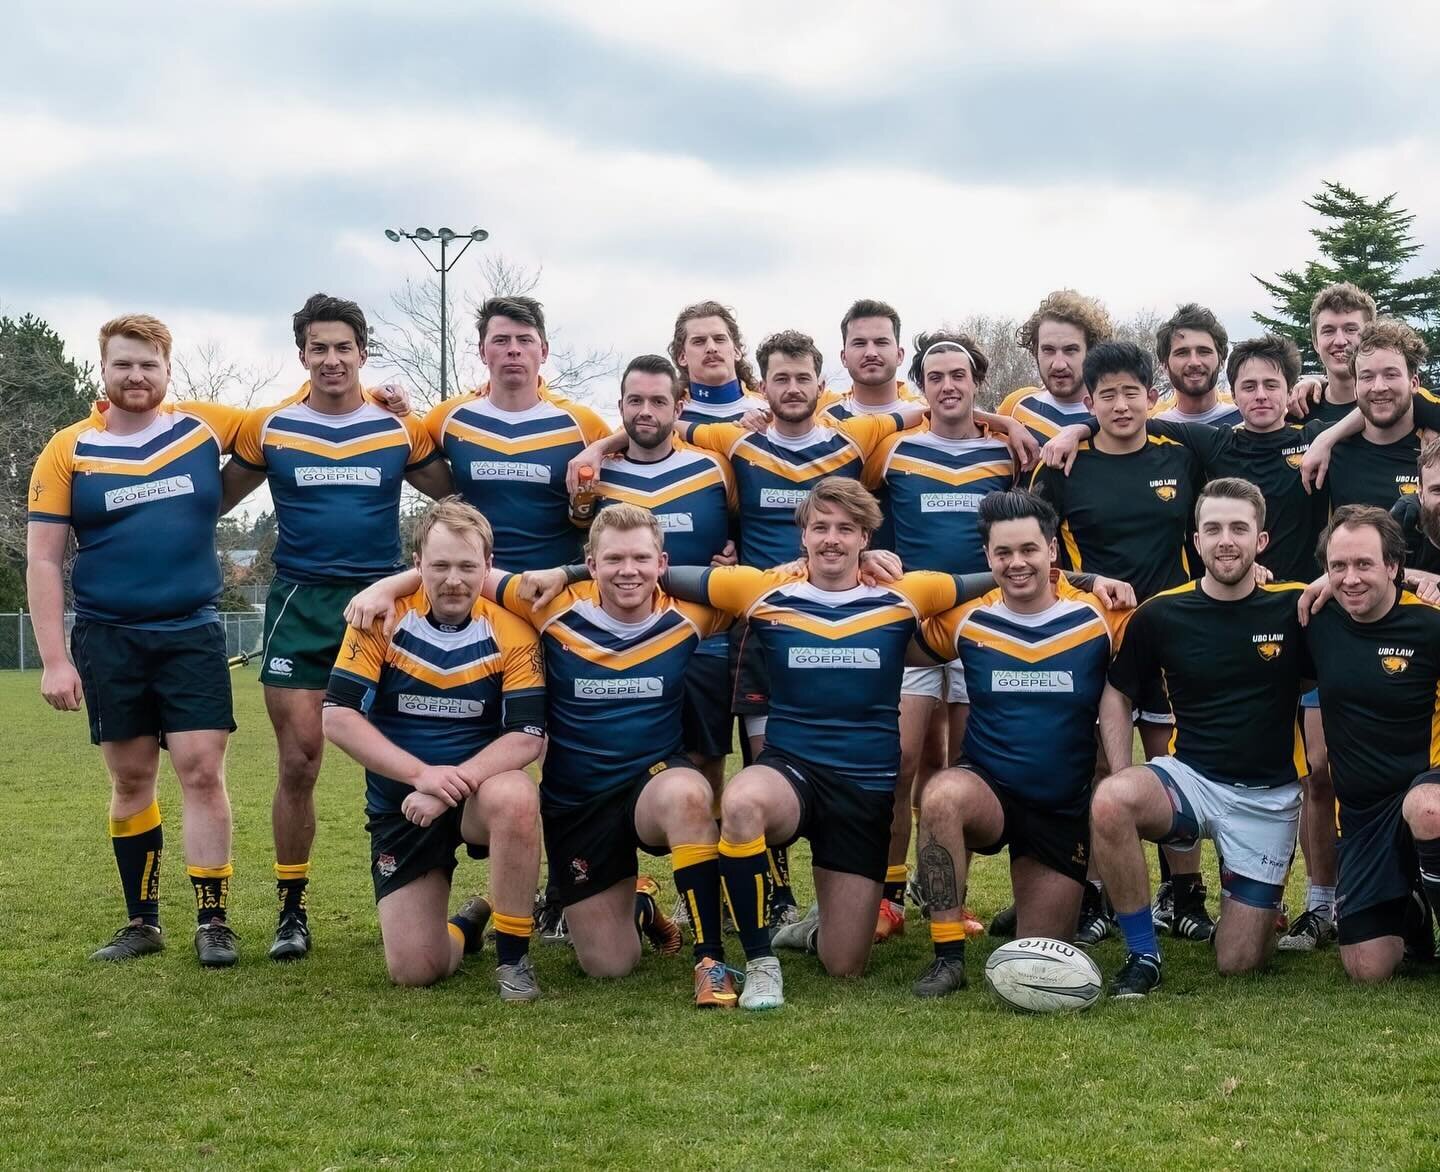 🏉🚌 Join the Slaughter Cup Fan Bus 🚌🏉

Join the UVic Law Rugby Team and cheer them on as they defend their winning streak against UBC at the annual Slaughter Cup, hosted by UBC! 

📅 Date: March 9th
📍 Depart: 11 AM ferry from Swartz Bay Ferry Ter